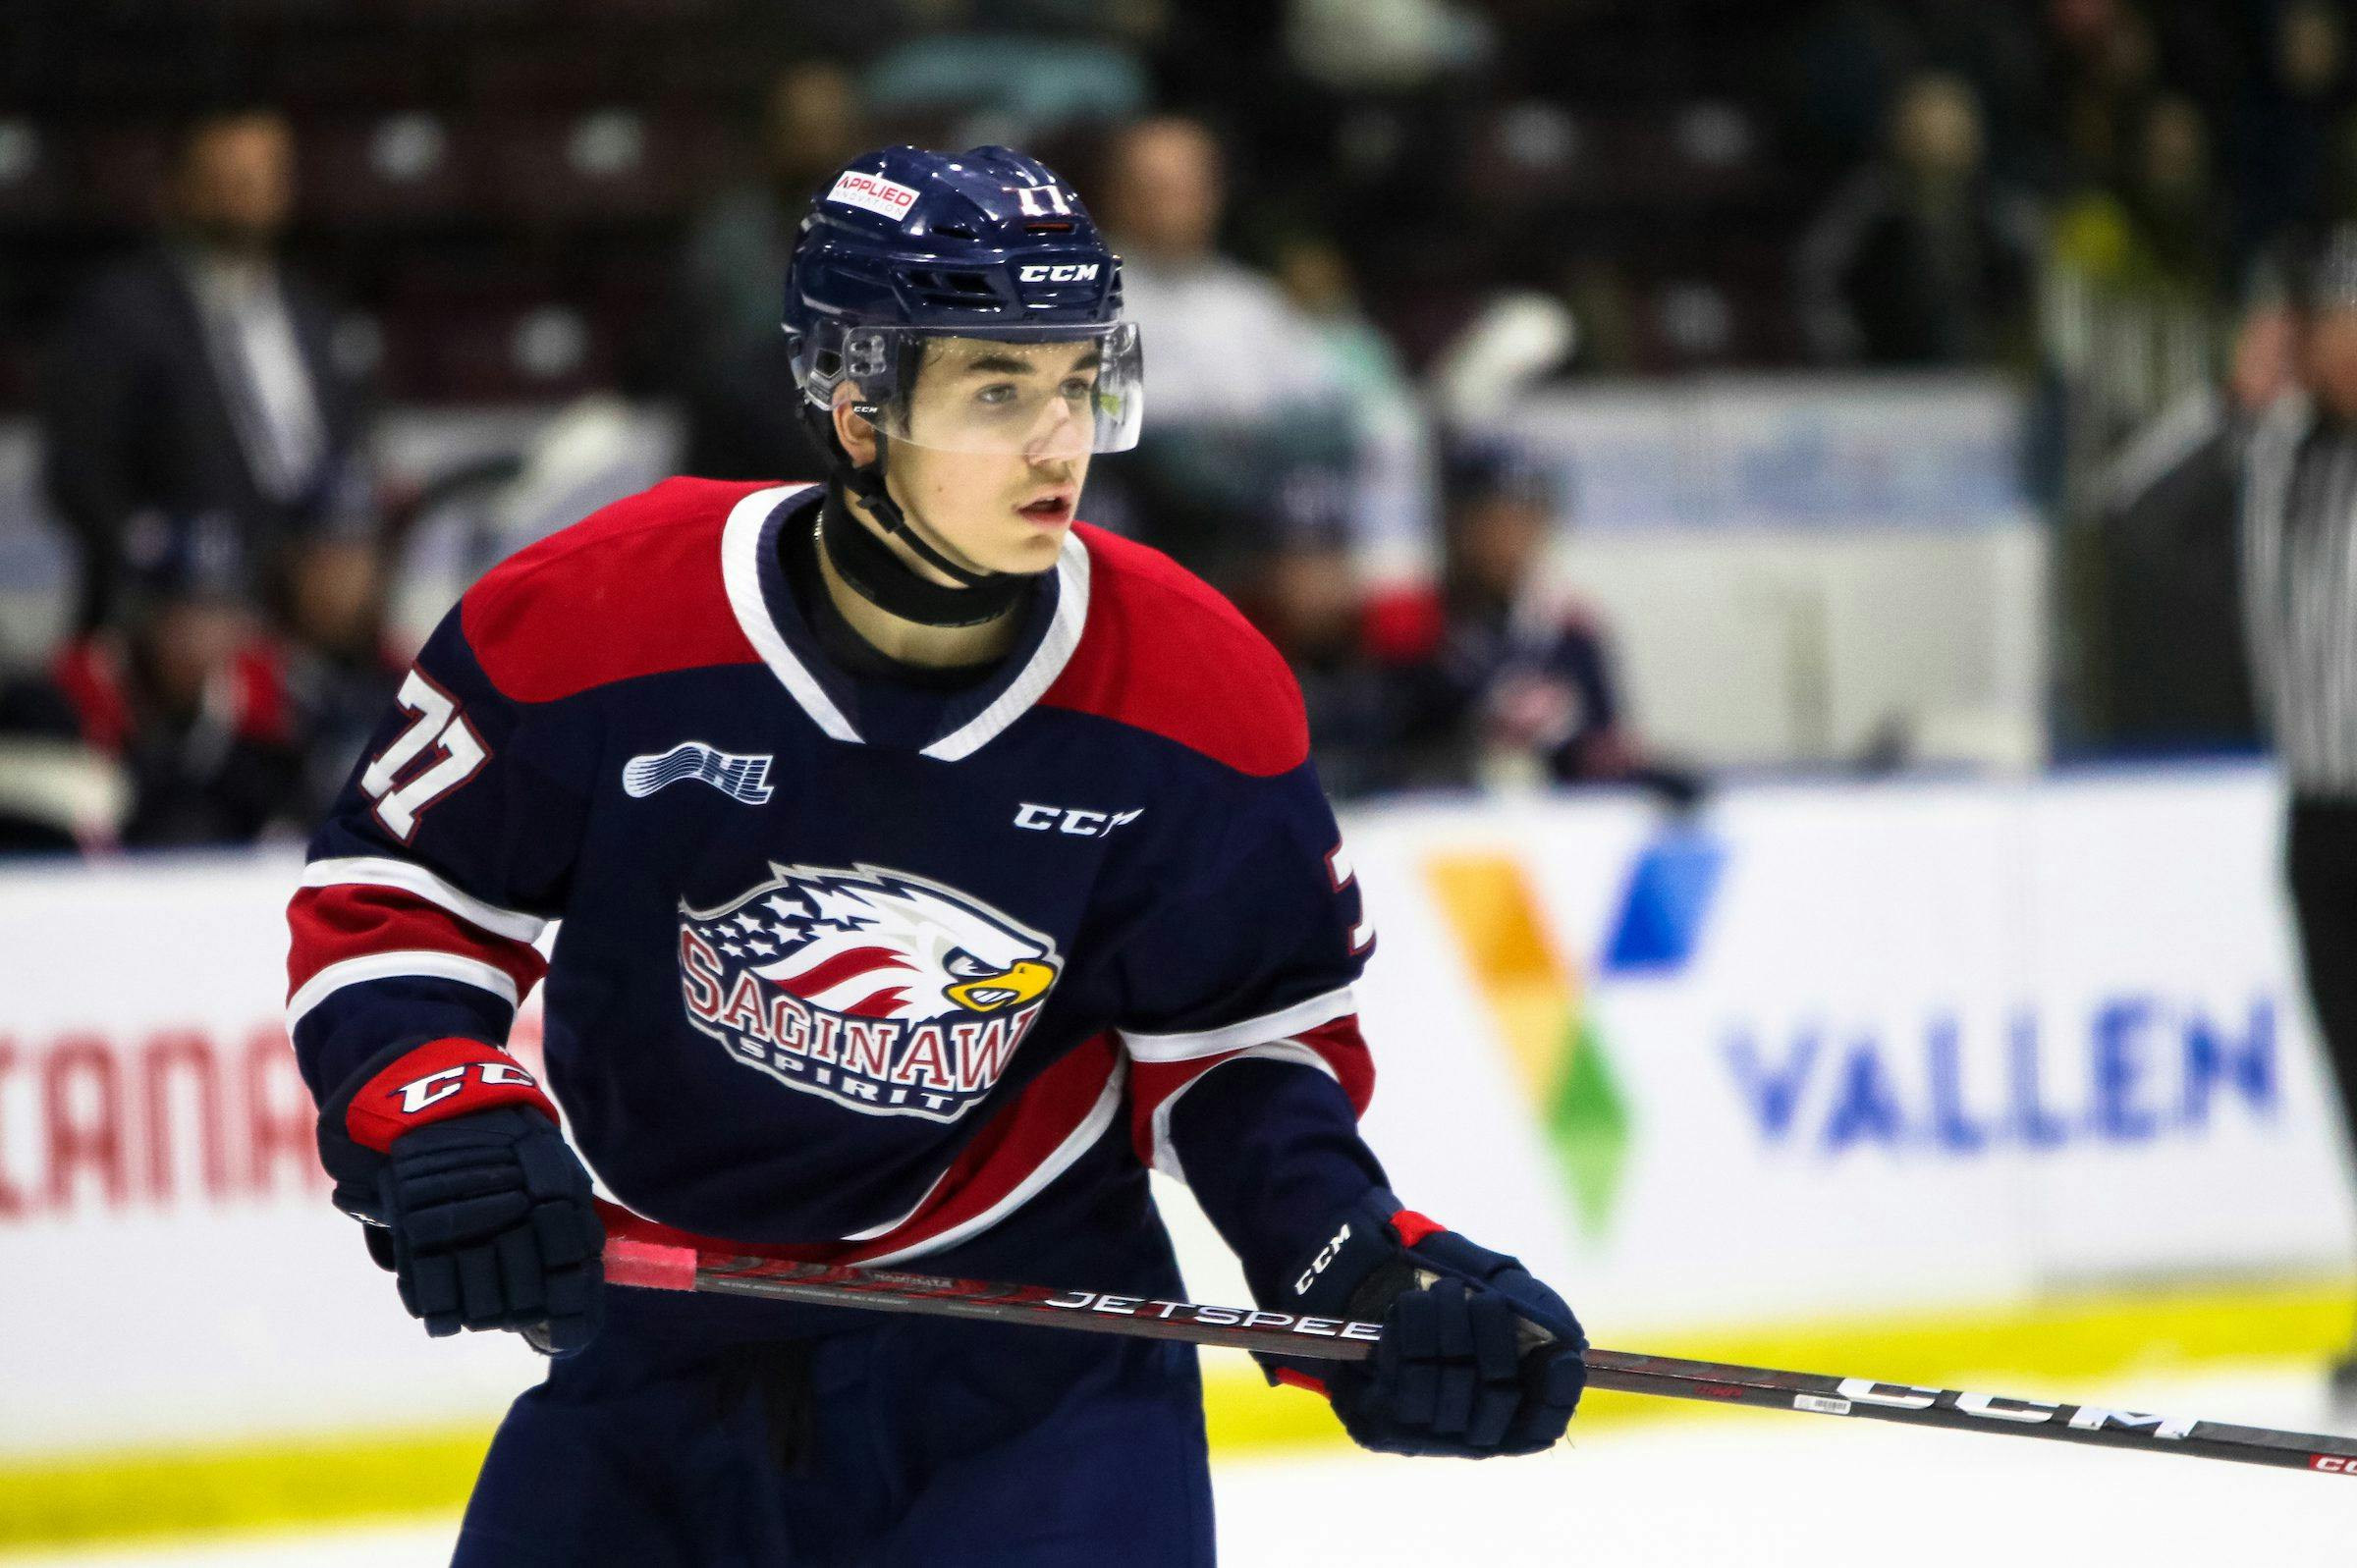 Michael Misa has sights set on gold in big year for top 2025 NHL Draft prospect